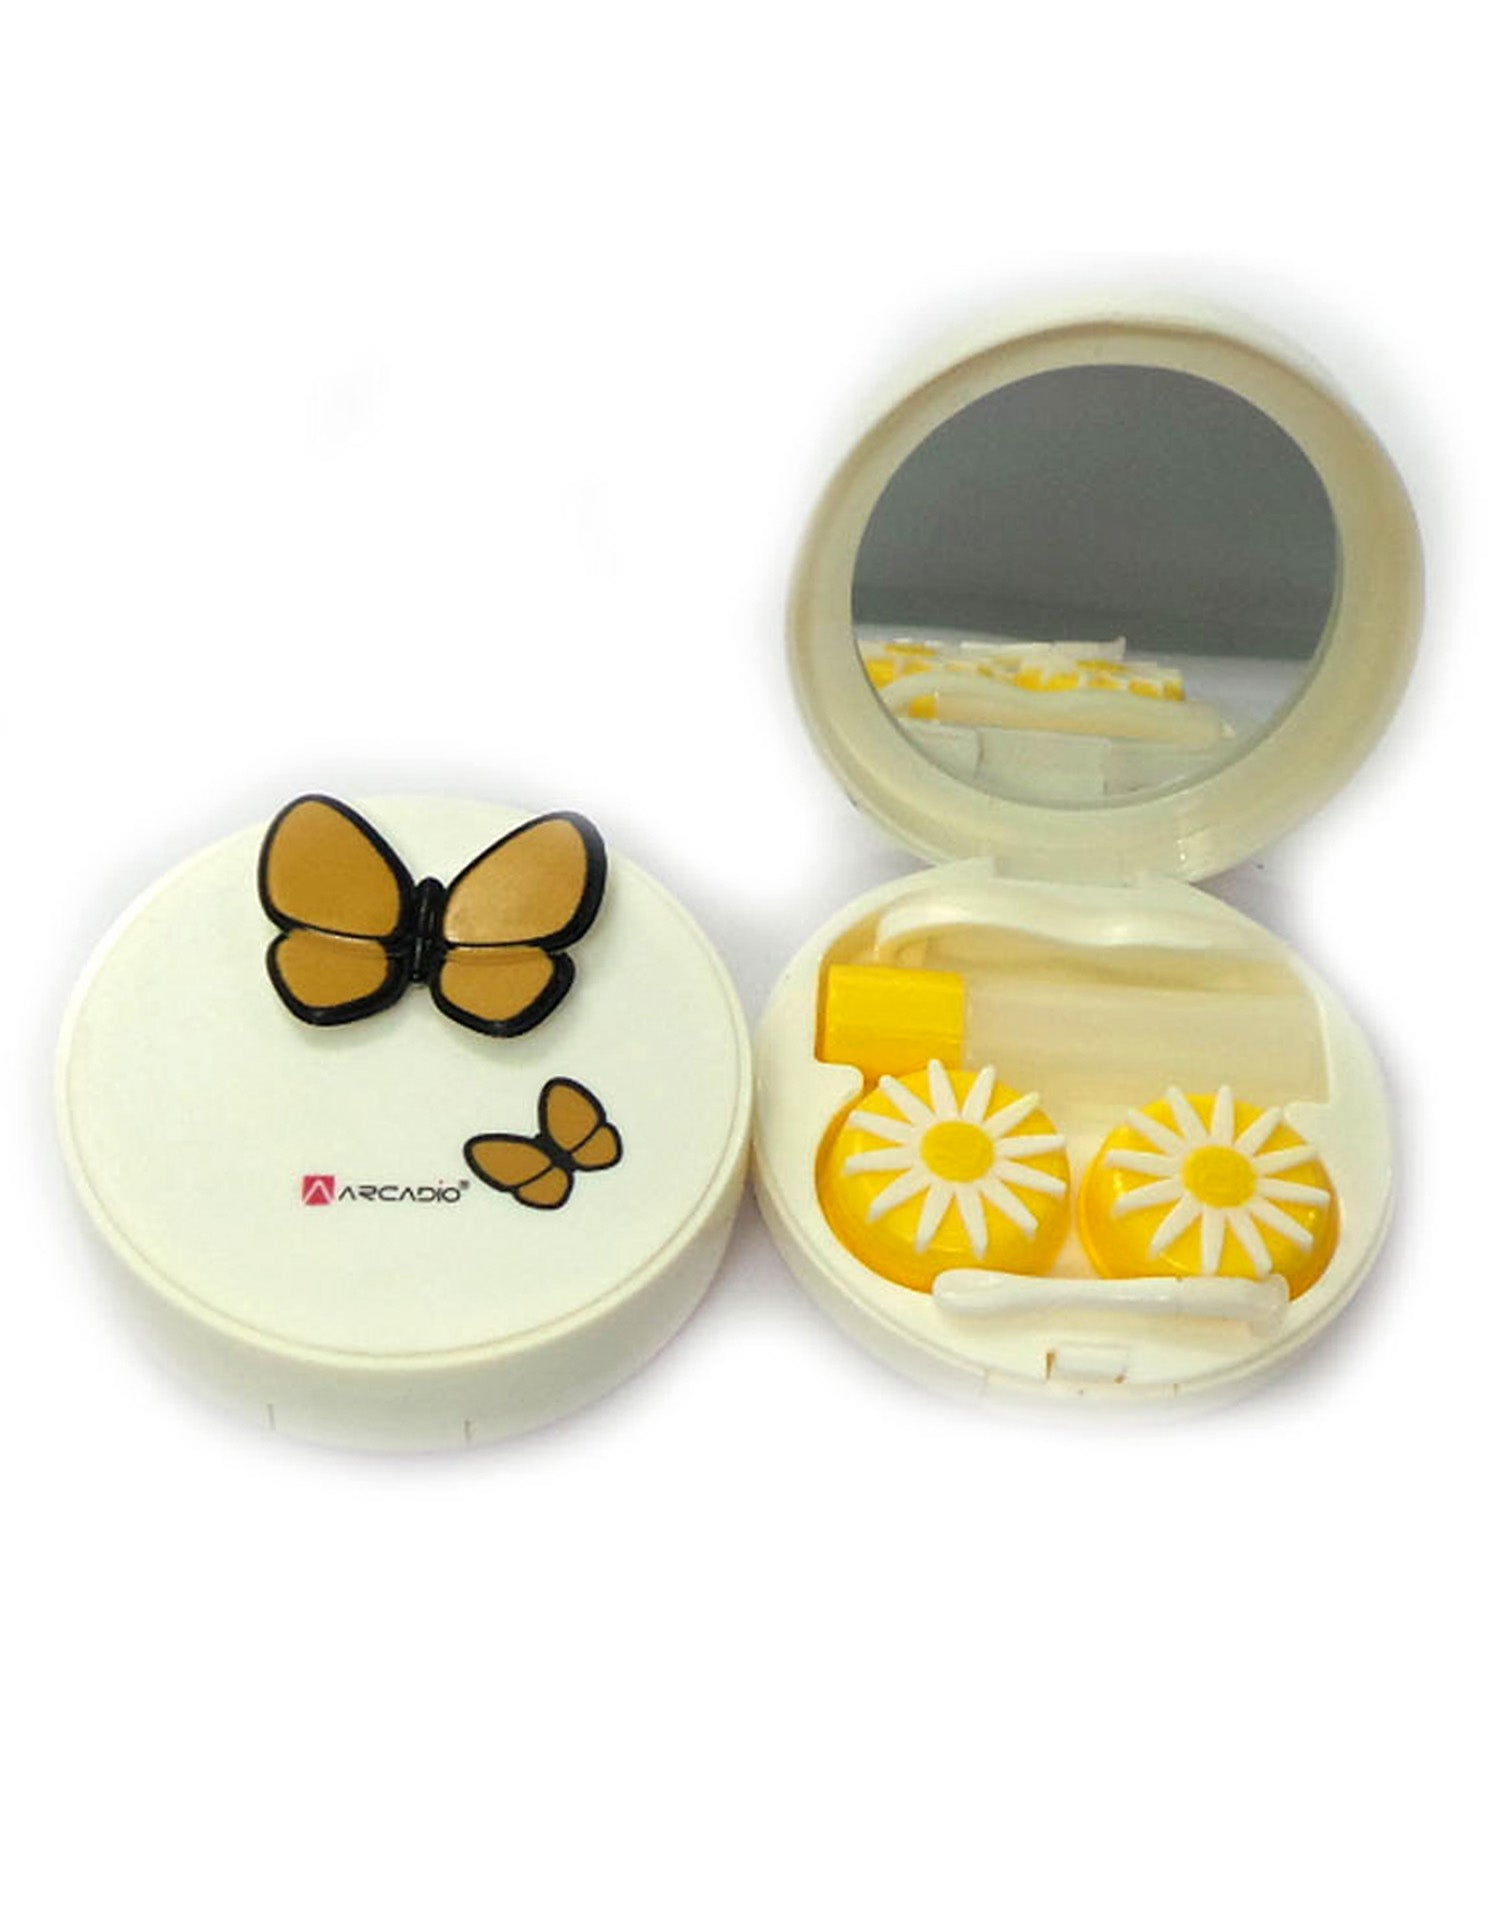 BUTTERFLY EFFECT - Designer Contact Lens Cases - A8063A-YL ARCADIO